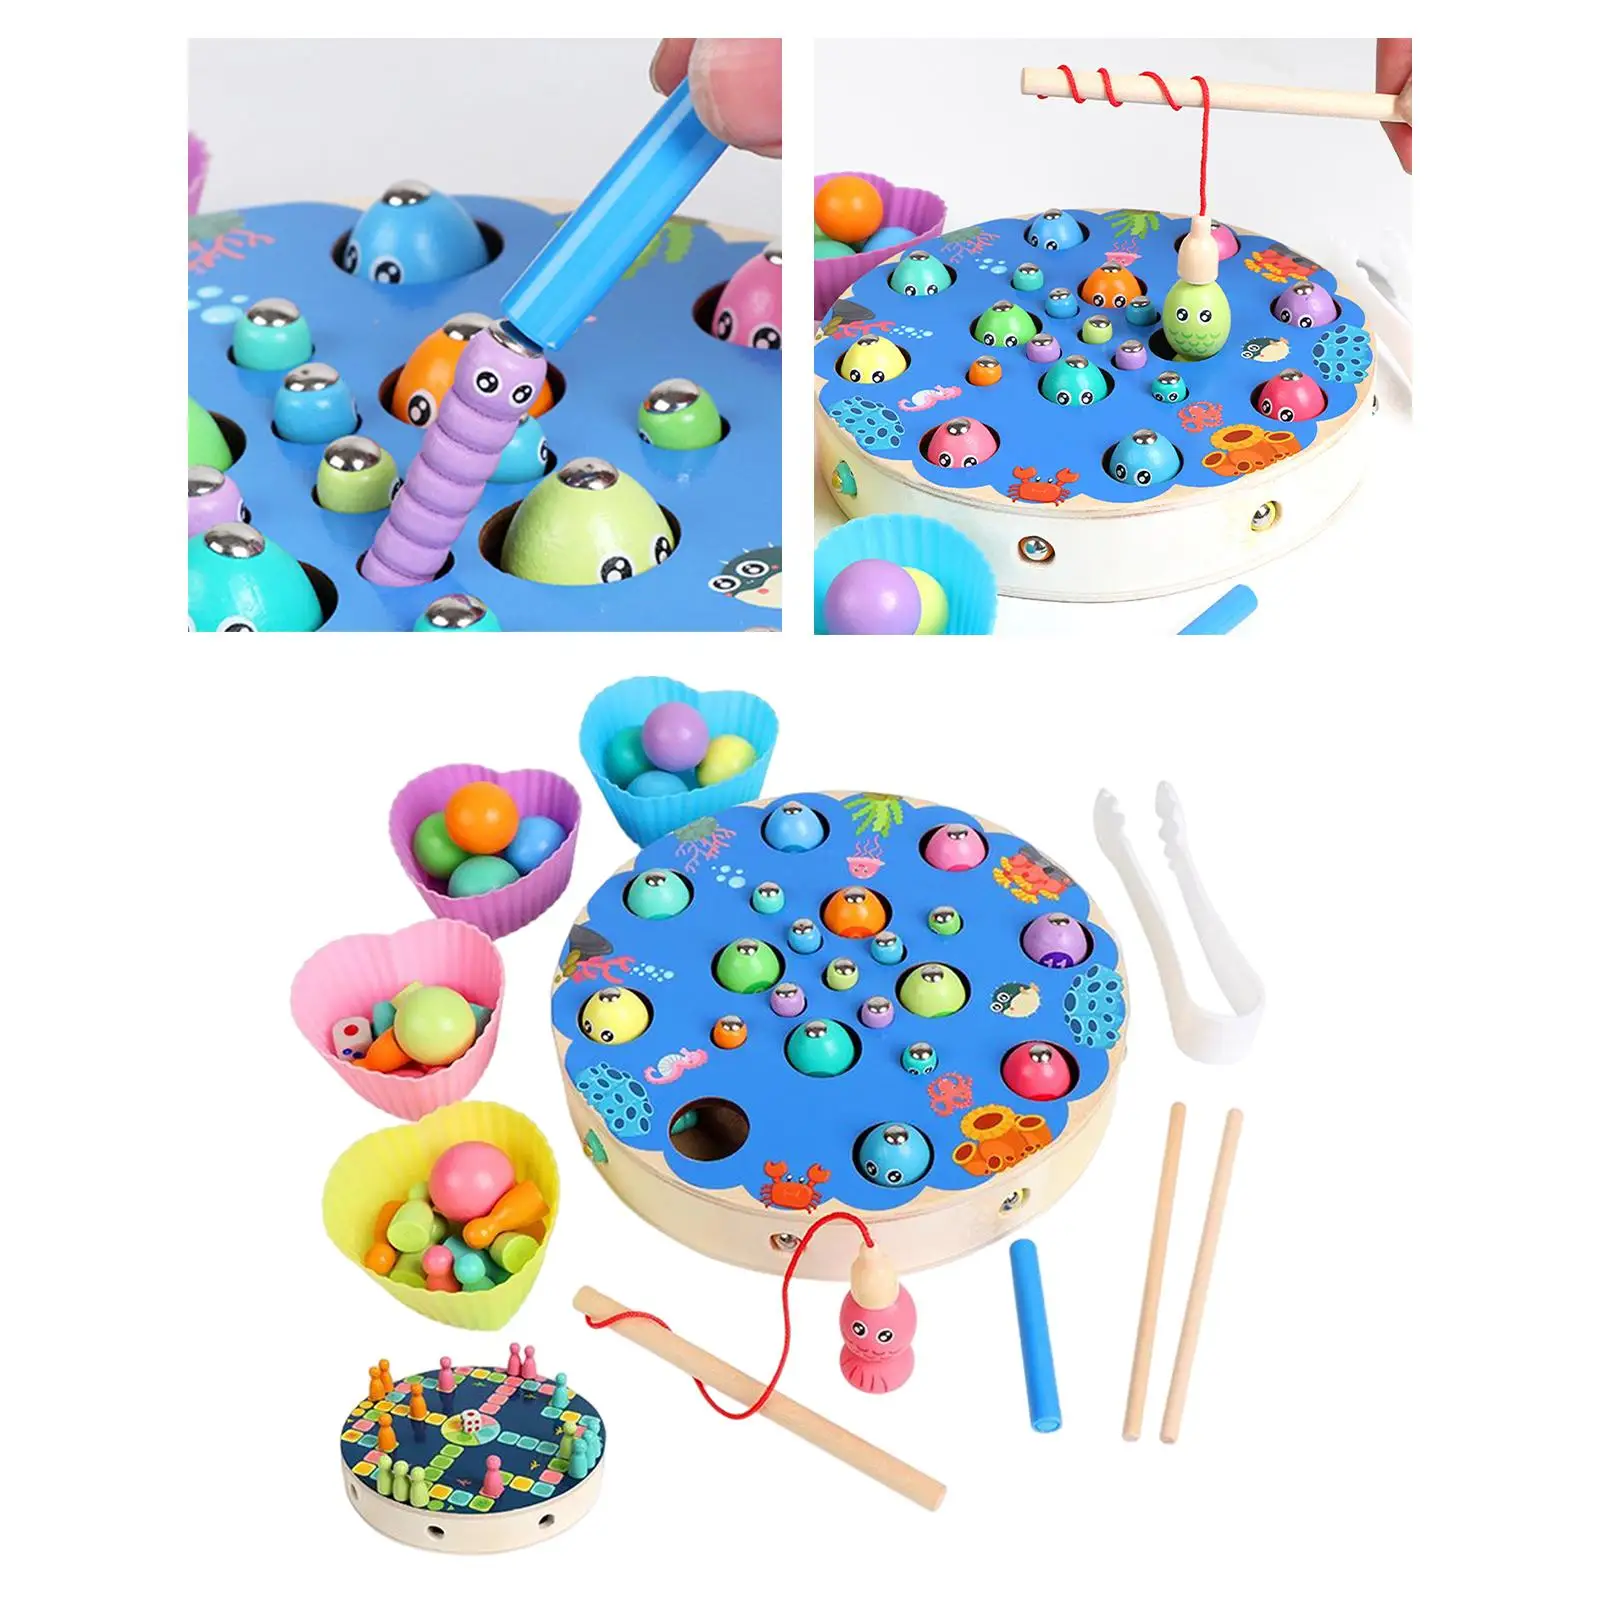  Toys Chopsticks Color Recognition Fishing Pole for Activity Gift